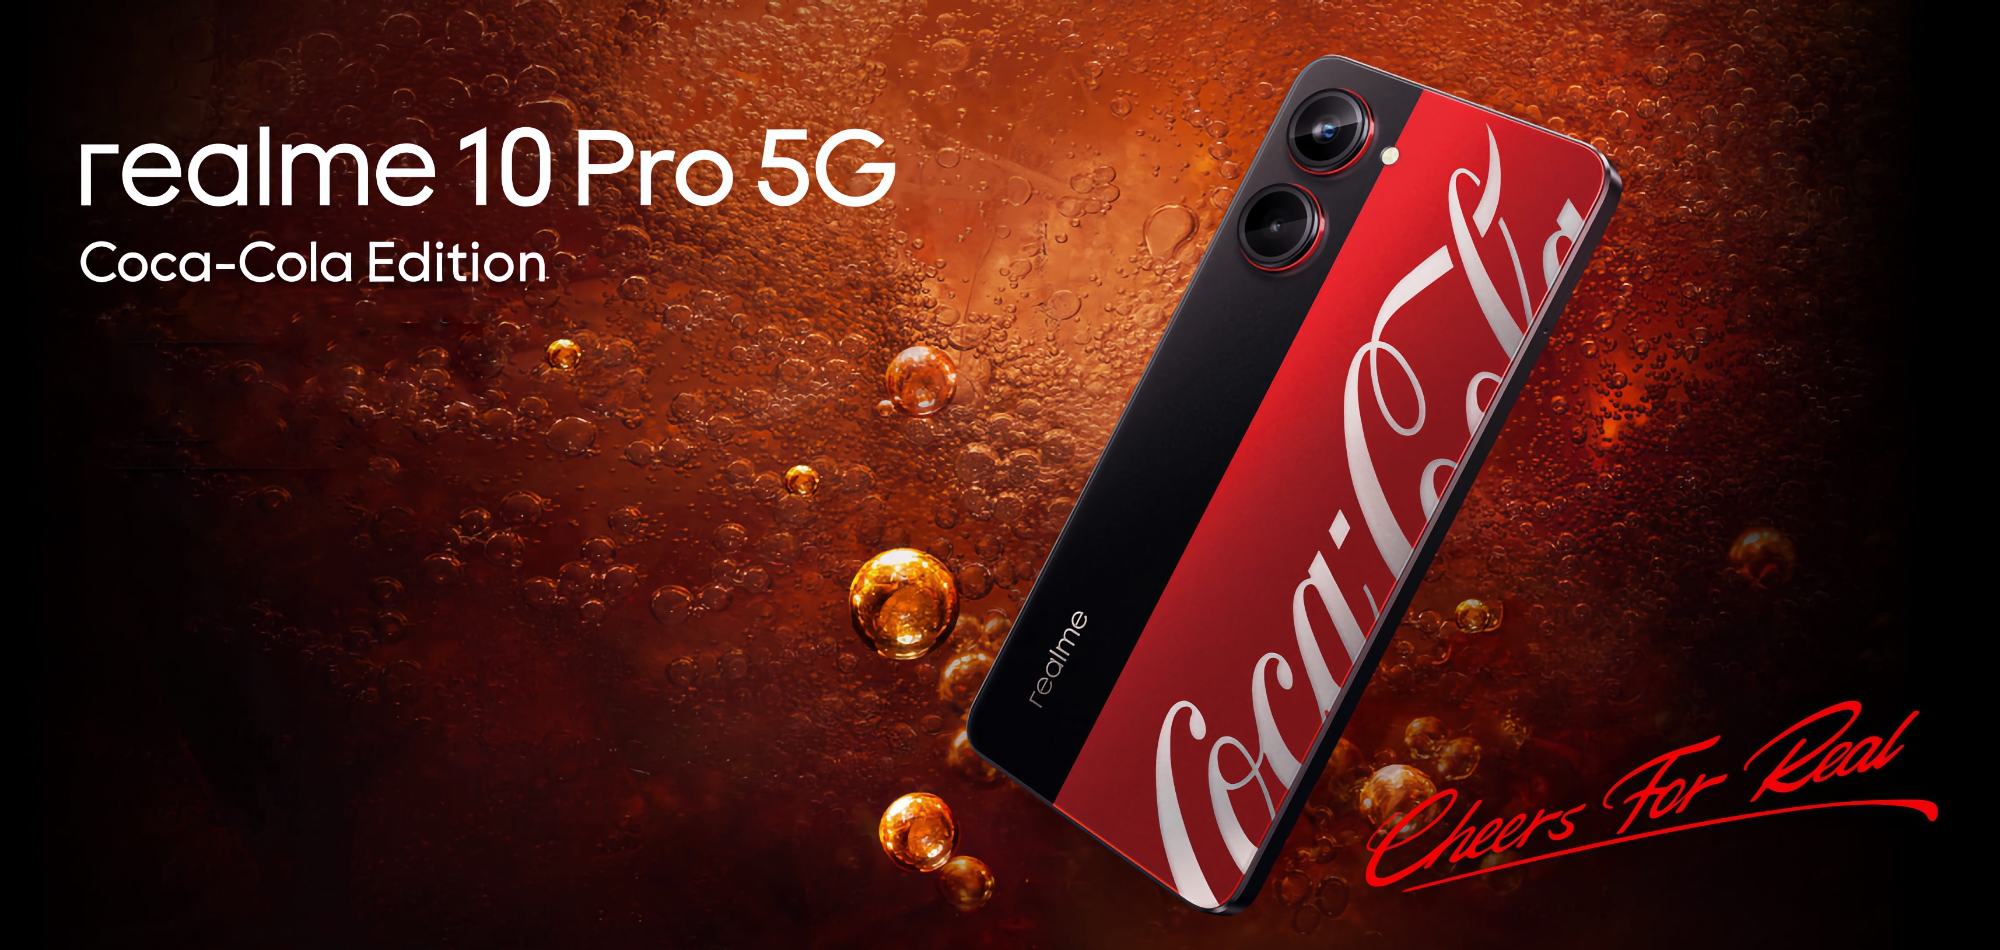 Here's what the realme 10 Pro 5G Coca-Cola Edition will look like